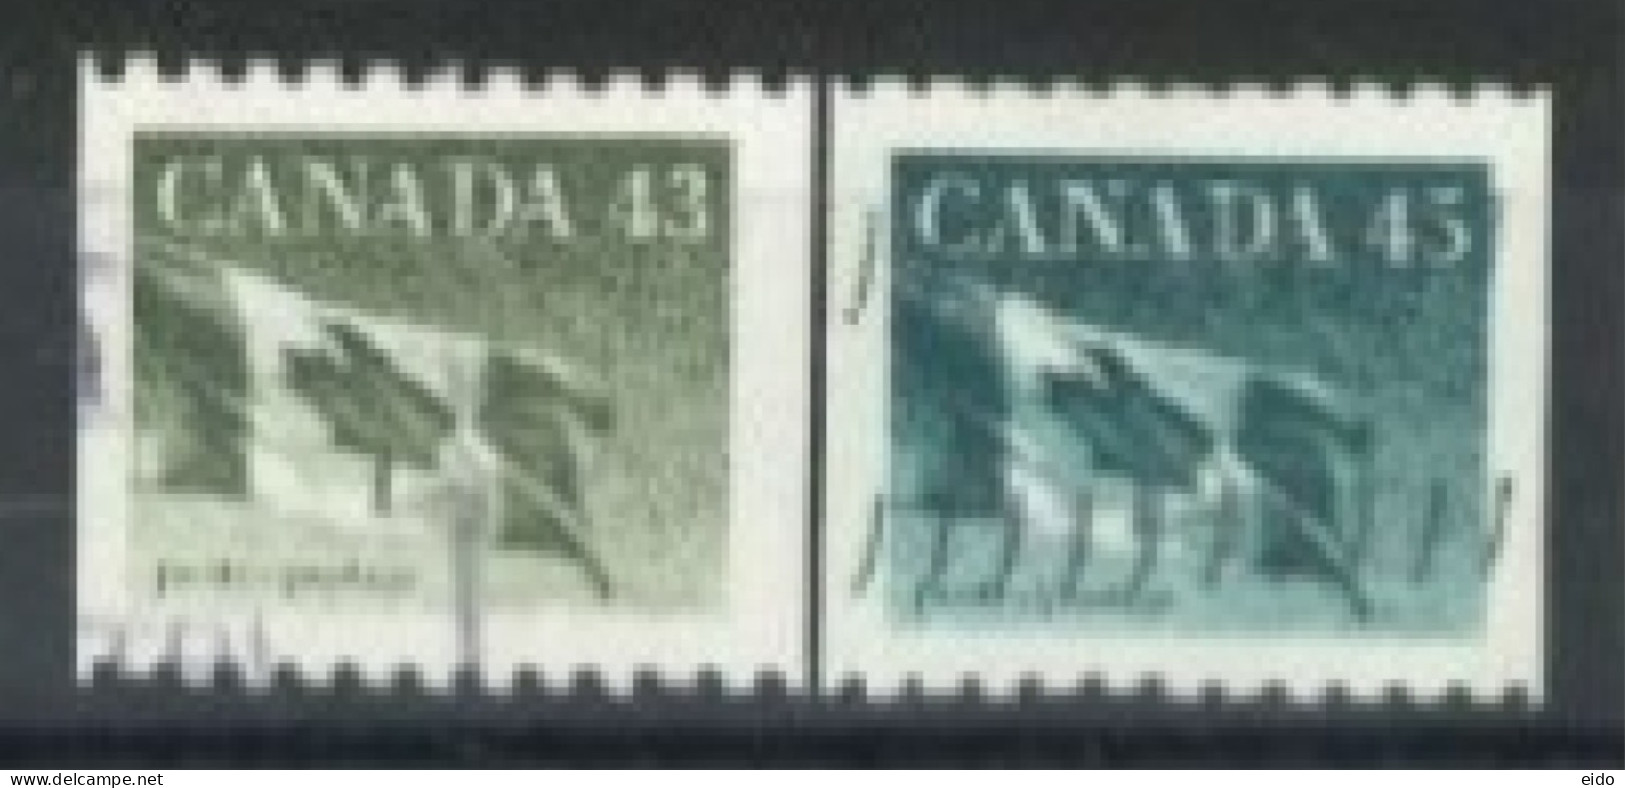 CANADA - 1989, CANADIAN FLAG STAMPS SET OF 2, USED. - Used Stamps